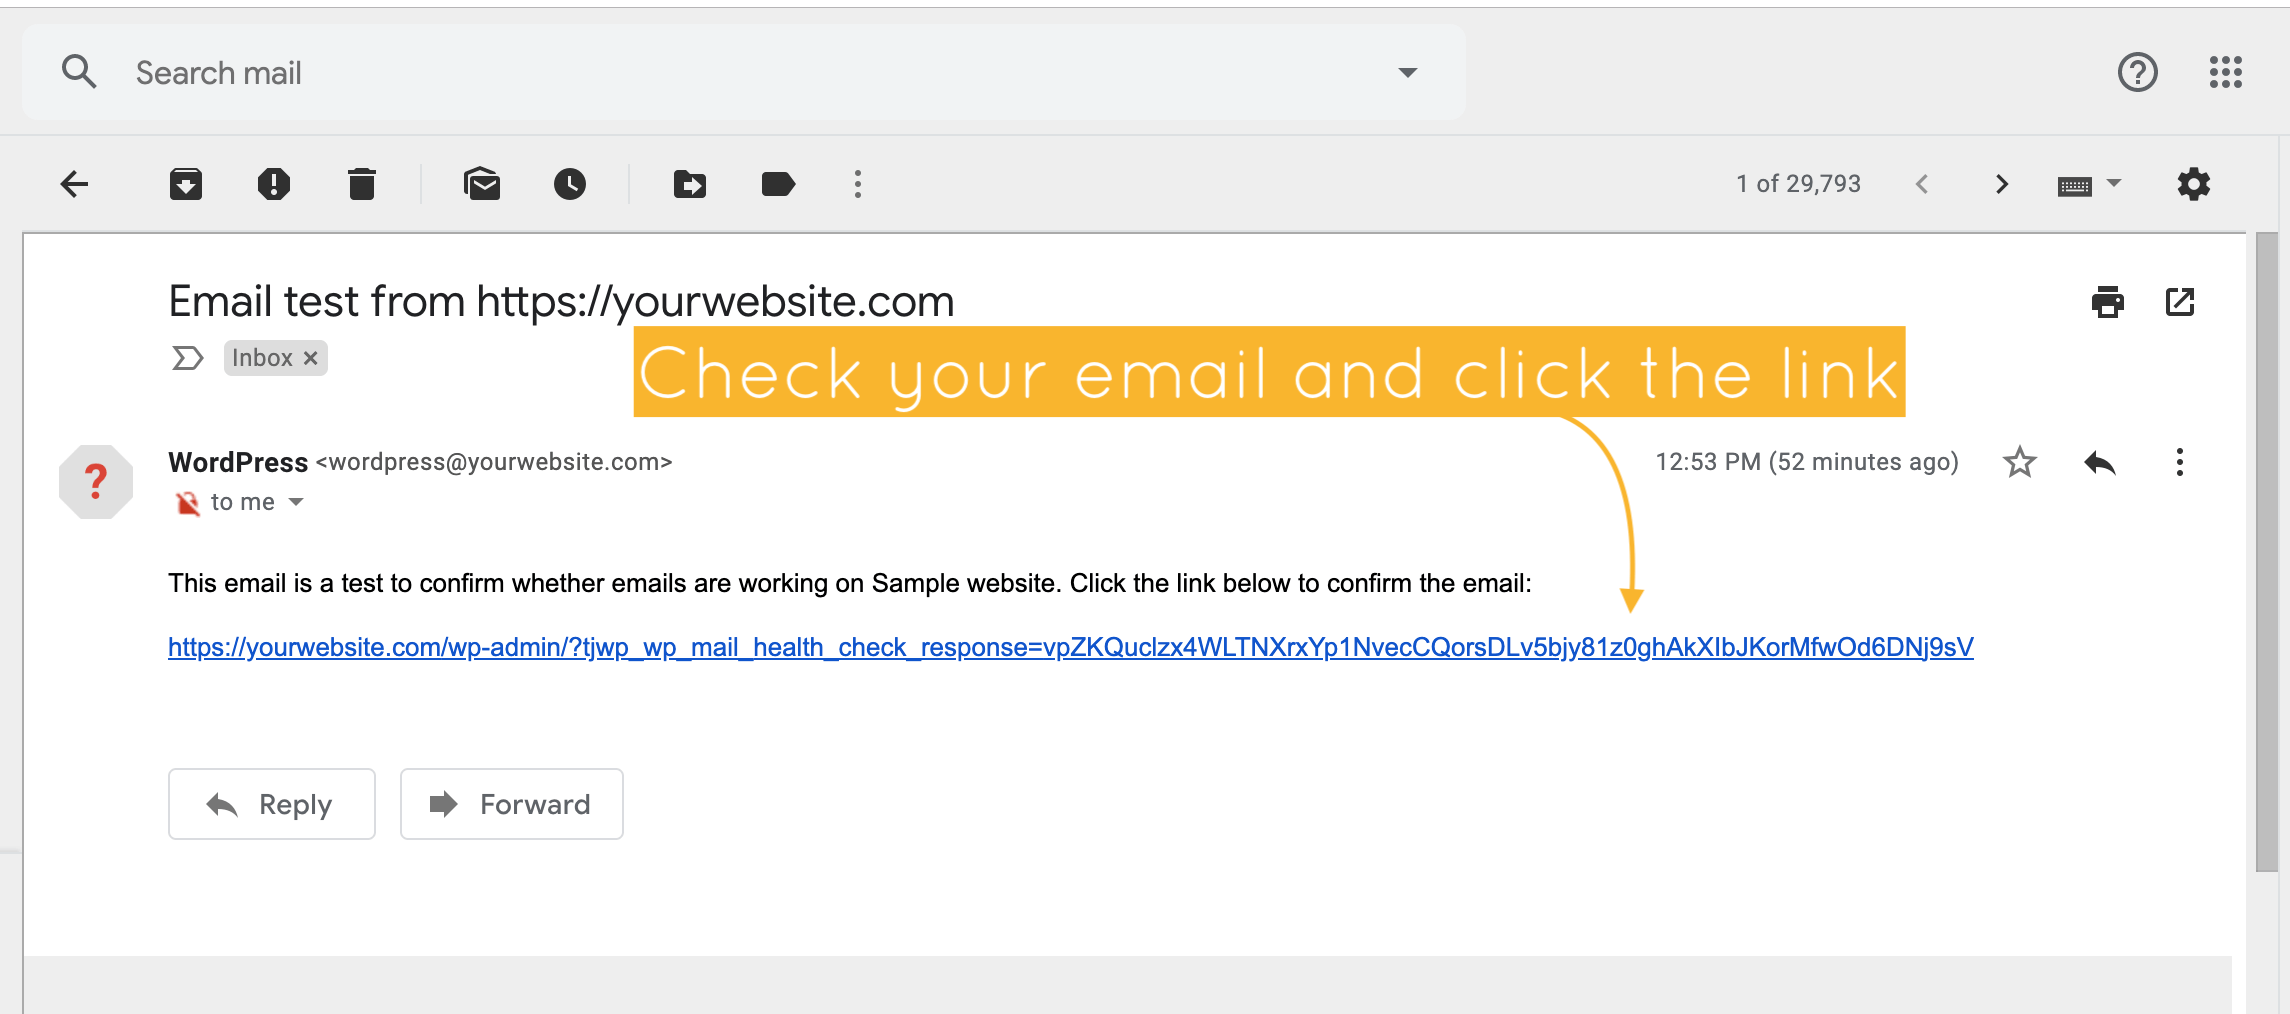 Head over to your email inbox and click the link in the email. That will confirm the emails are working for your website.